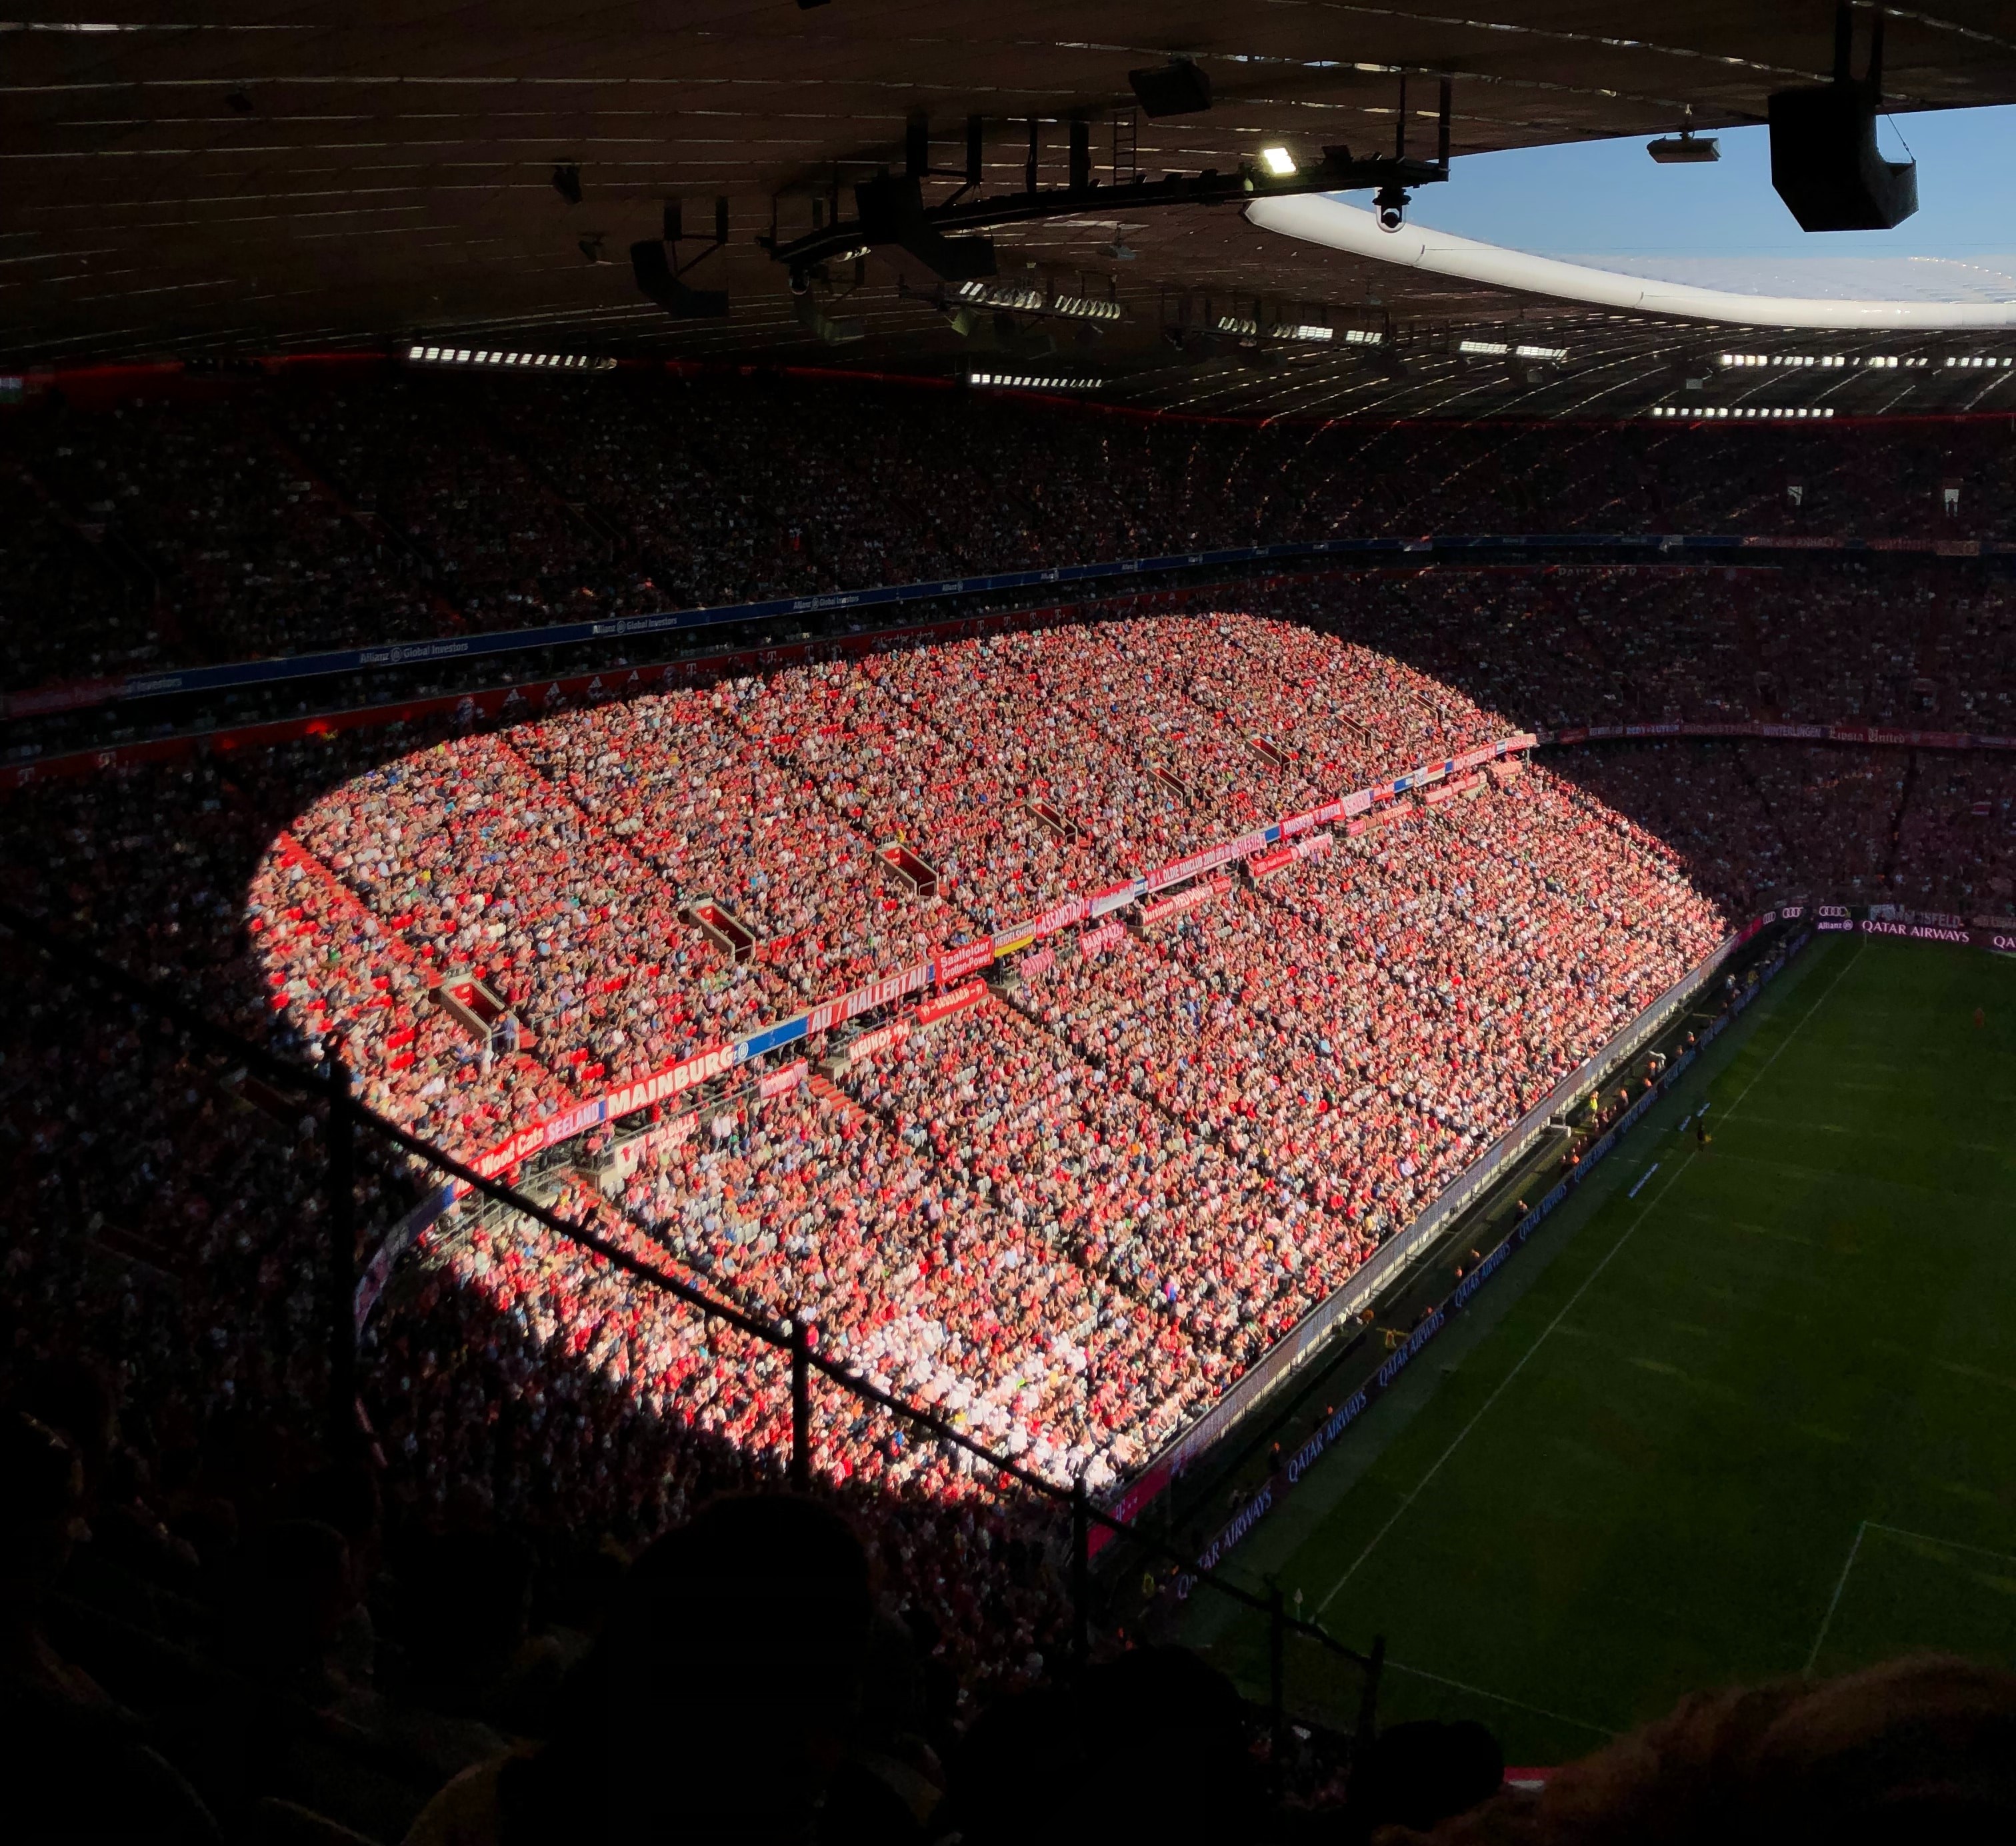 View of fans at sports stadium where sun is directly pointing at some fans causing poor thermal comfort